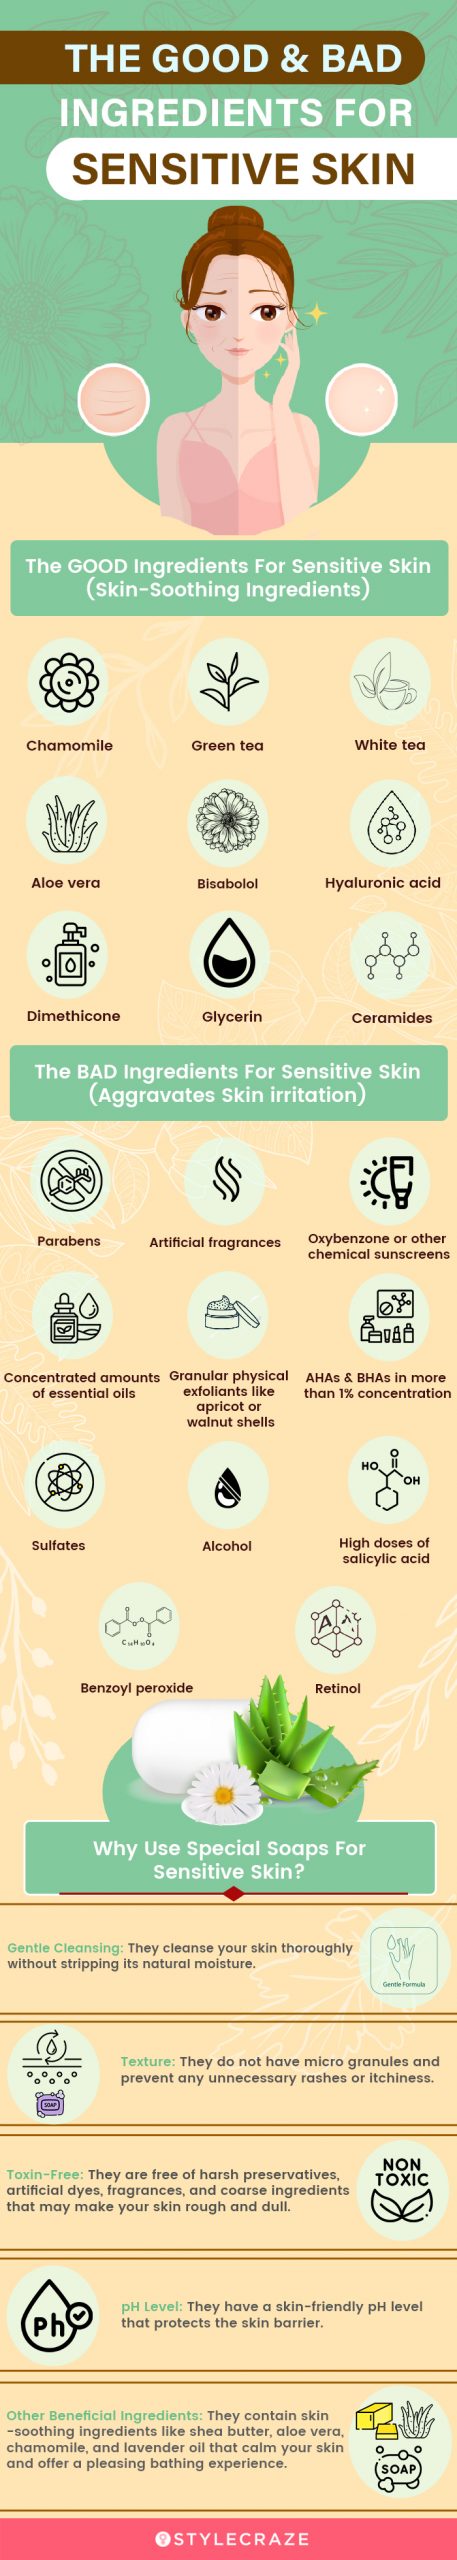 The Good & Bad Ingredients For Sensitive Skin (infographic)